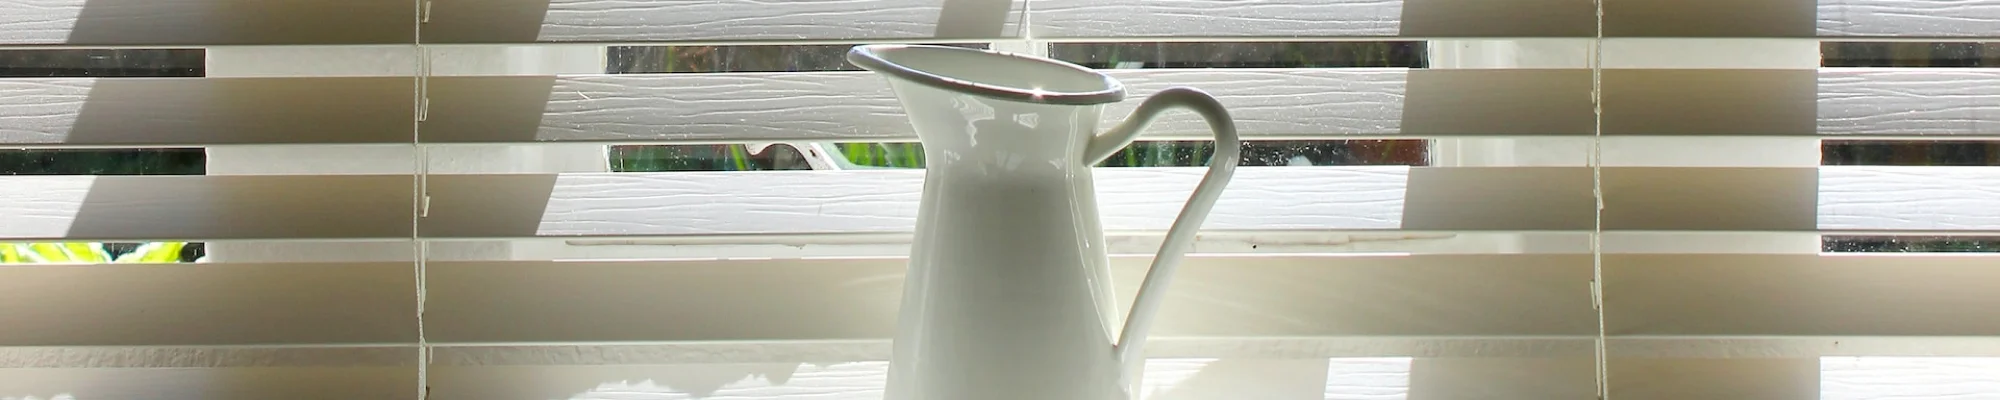 Water pitcher sitting on a table in front of a window with blinds